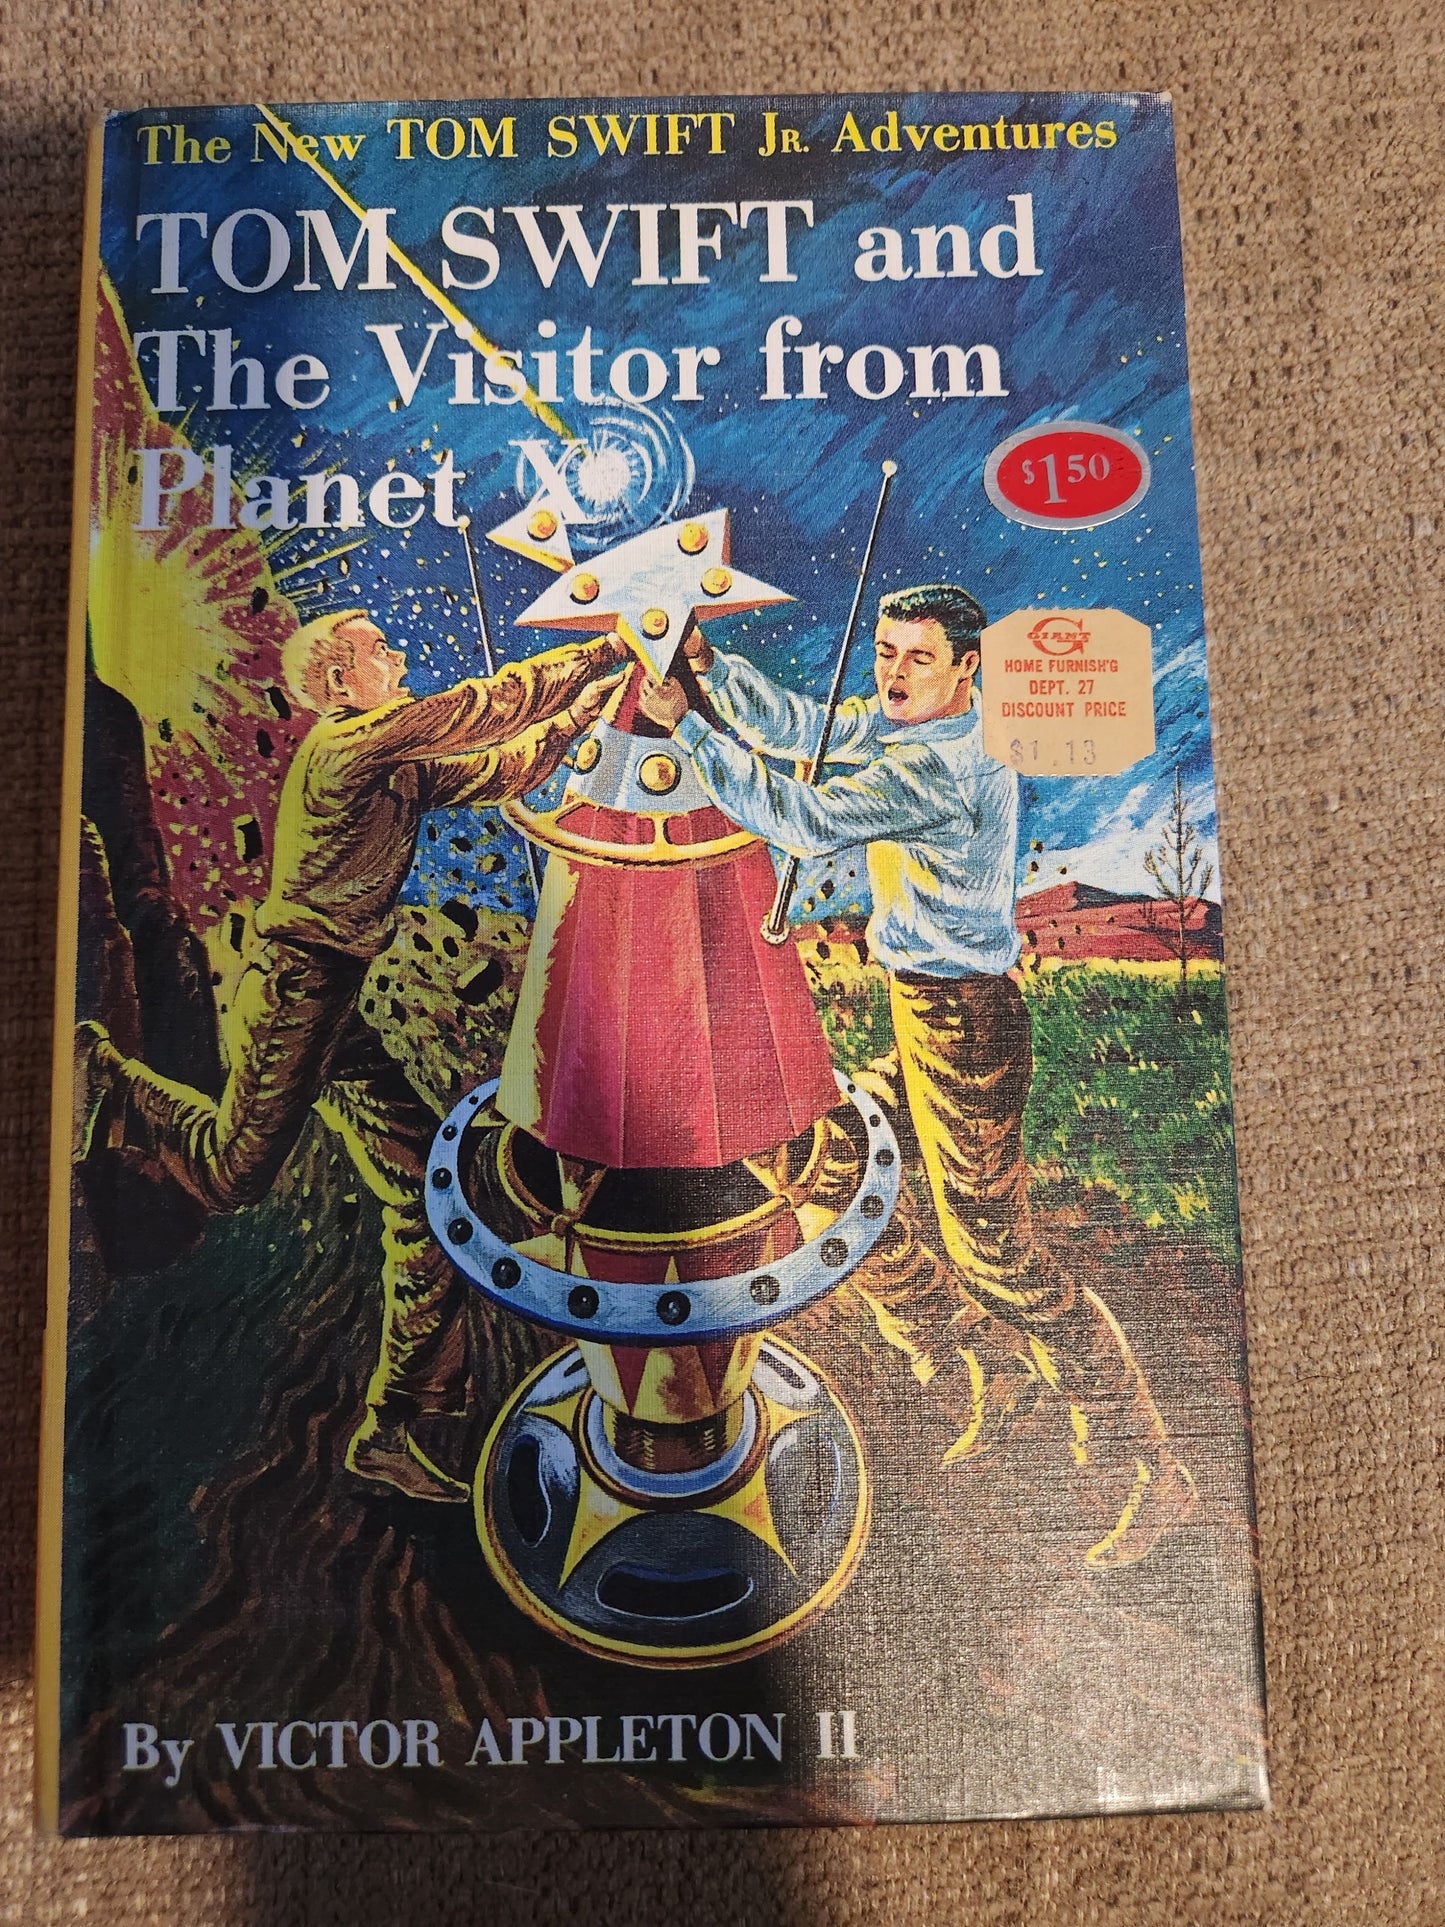 "Tom Swift and The Visitor from Planet X